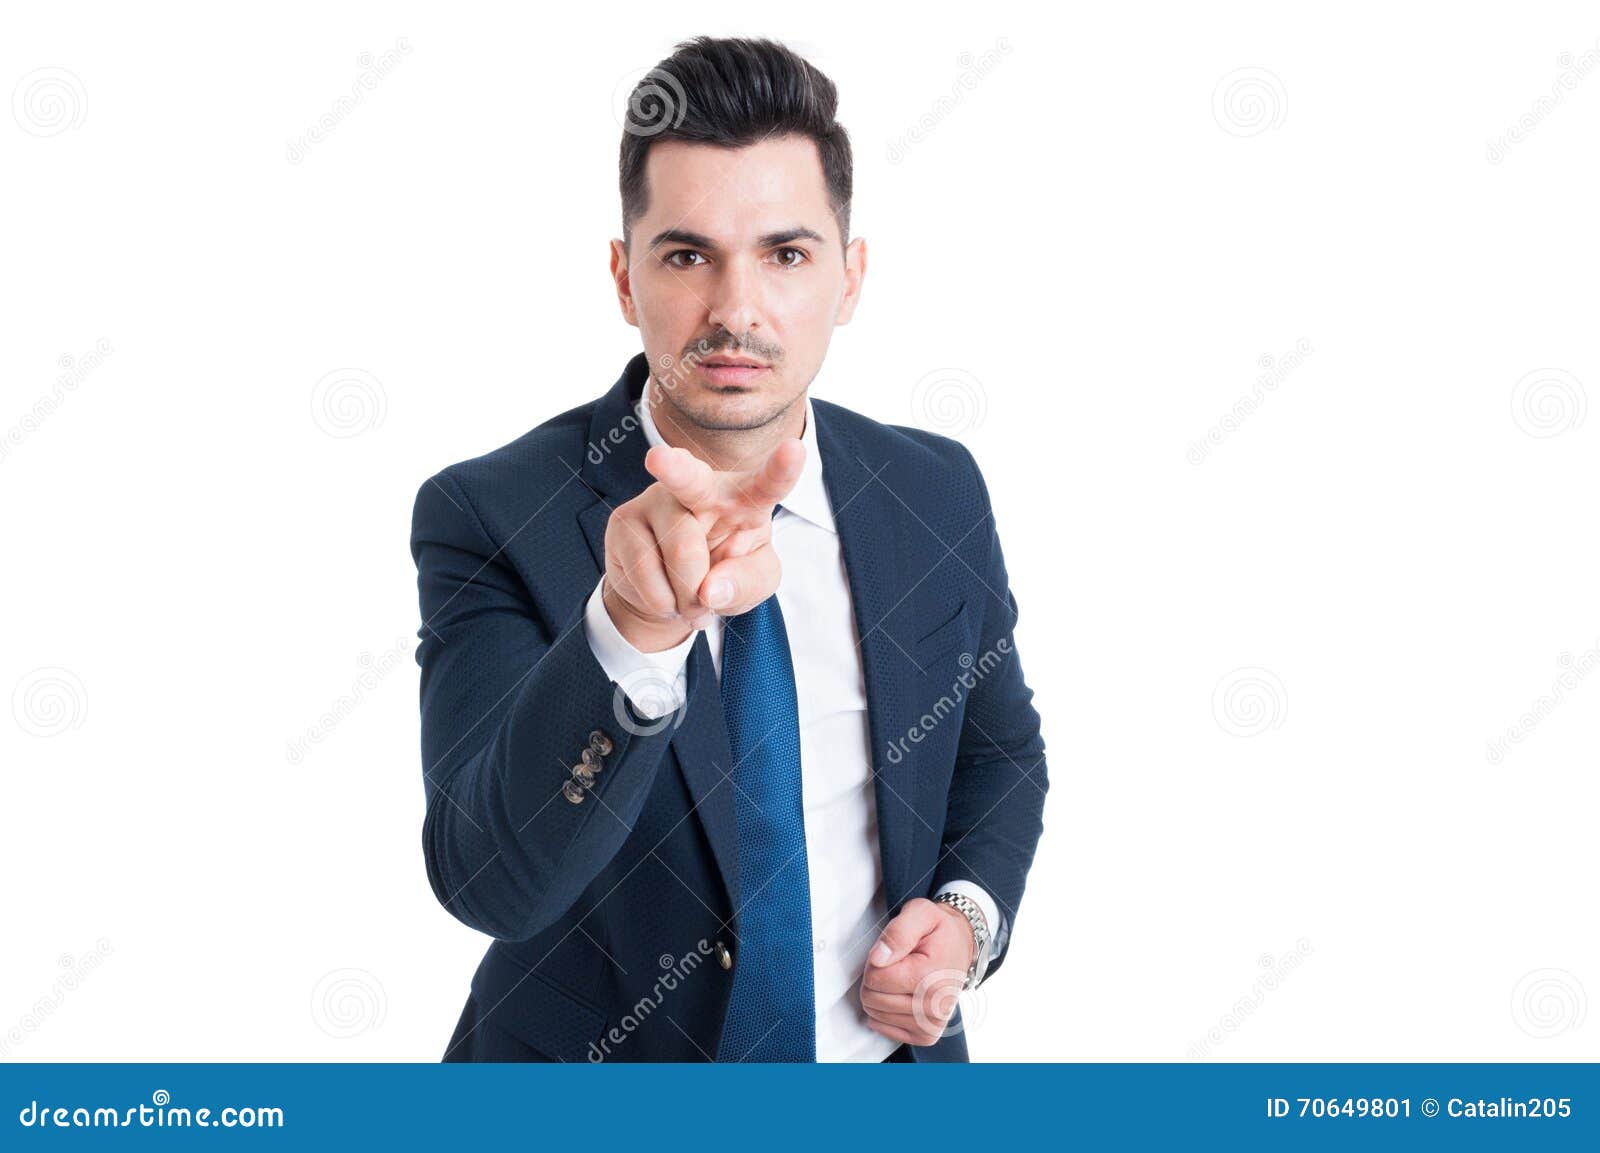 Business Man Making I See You Gesture Stock Image - Image of ...